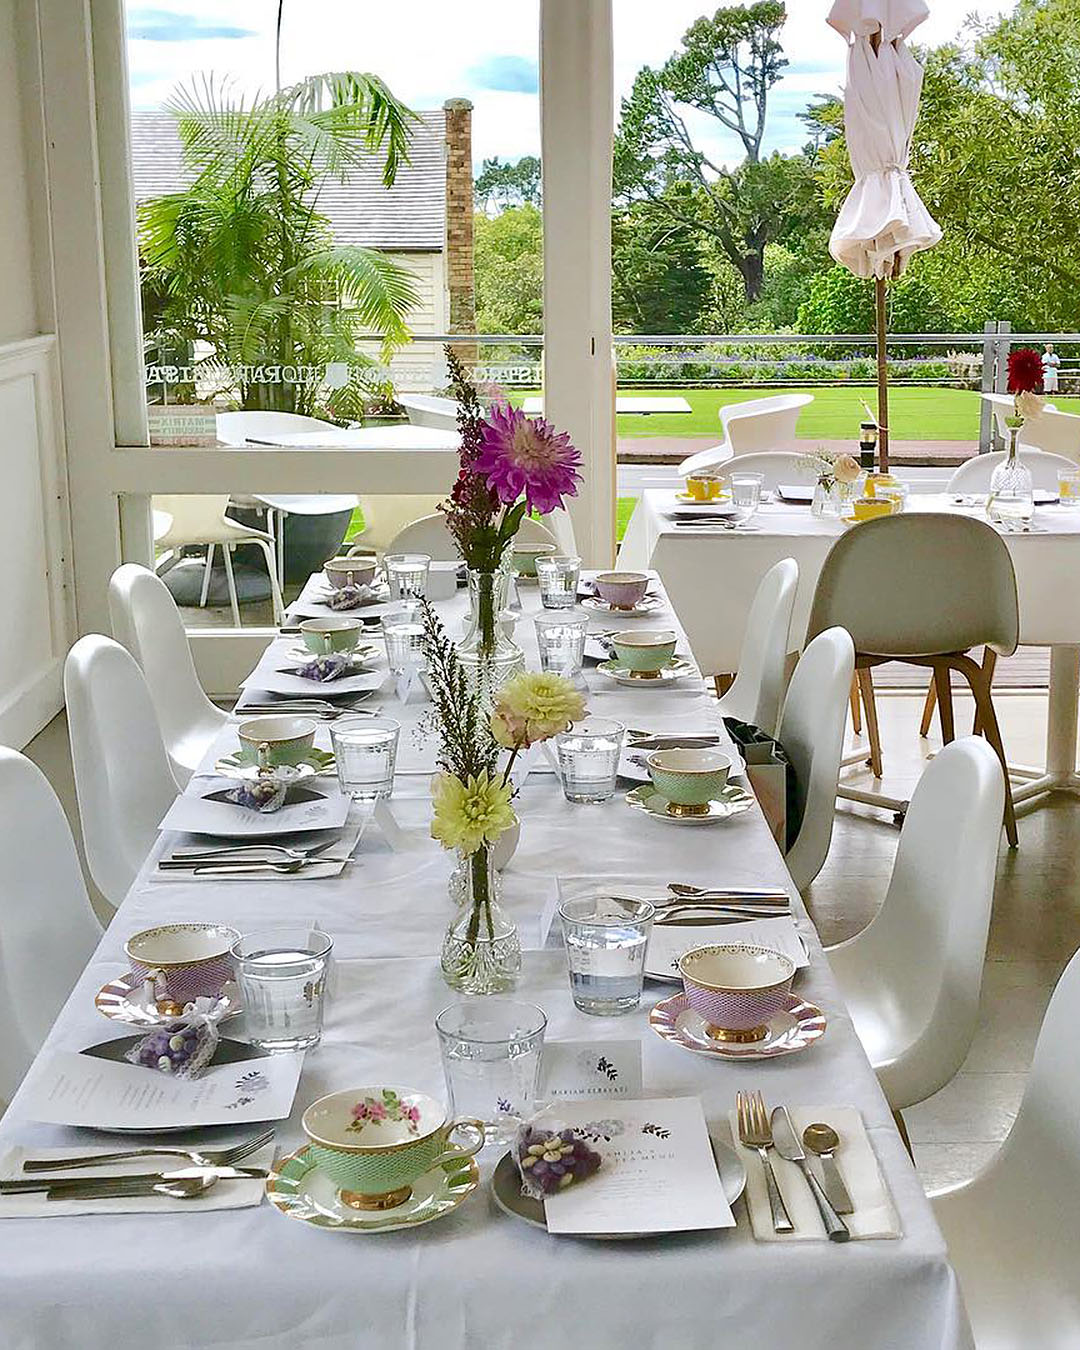 The lovely dining room at Cornwall Park Bistro, where you can enjoy a great high tea.